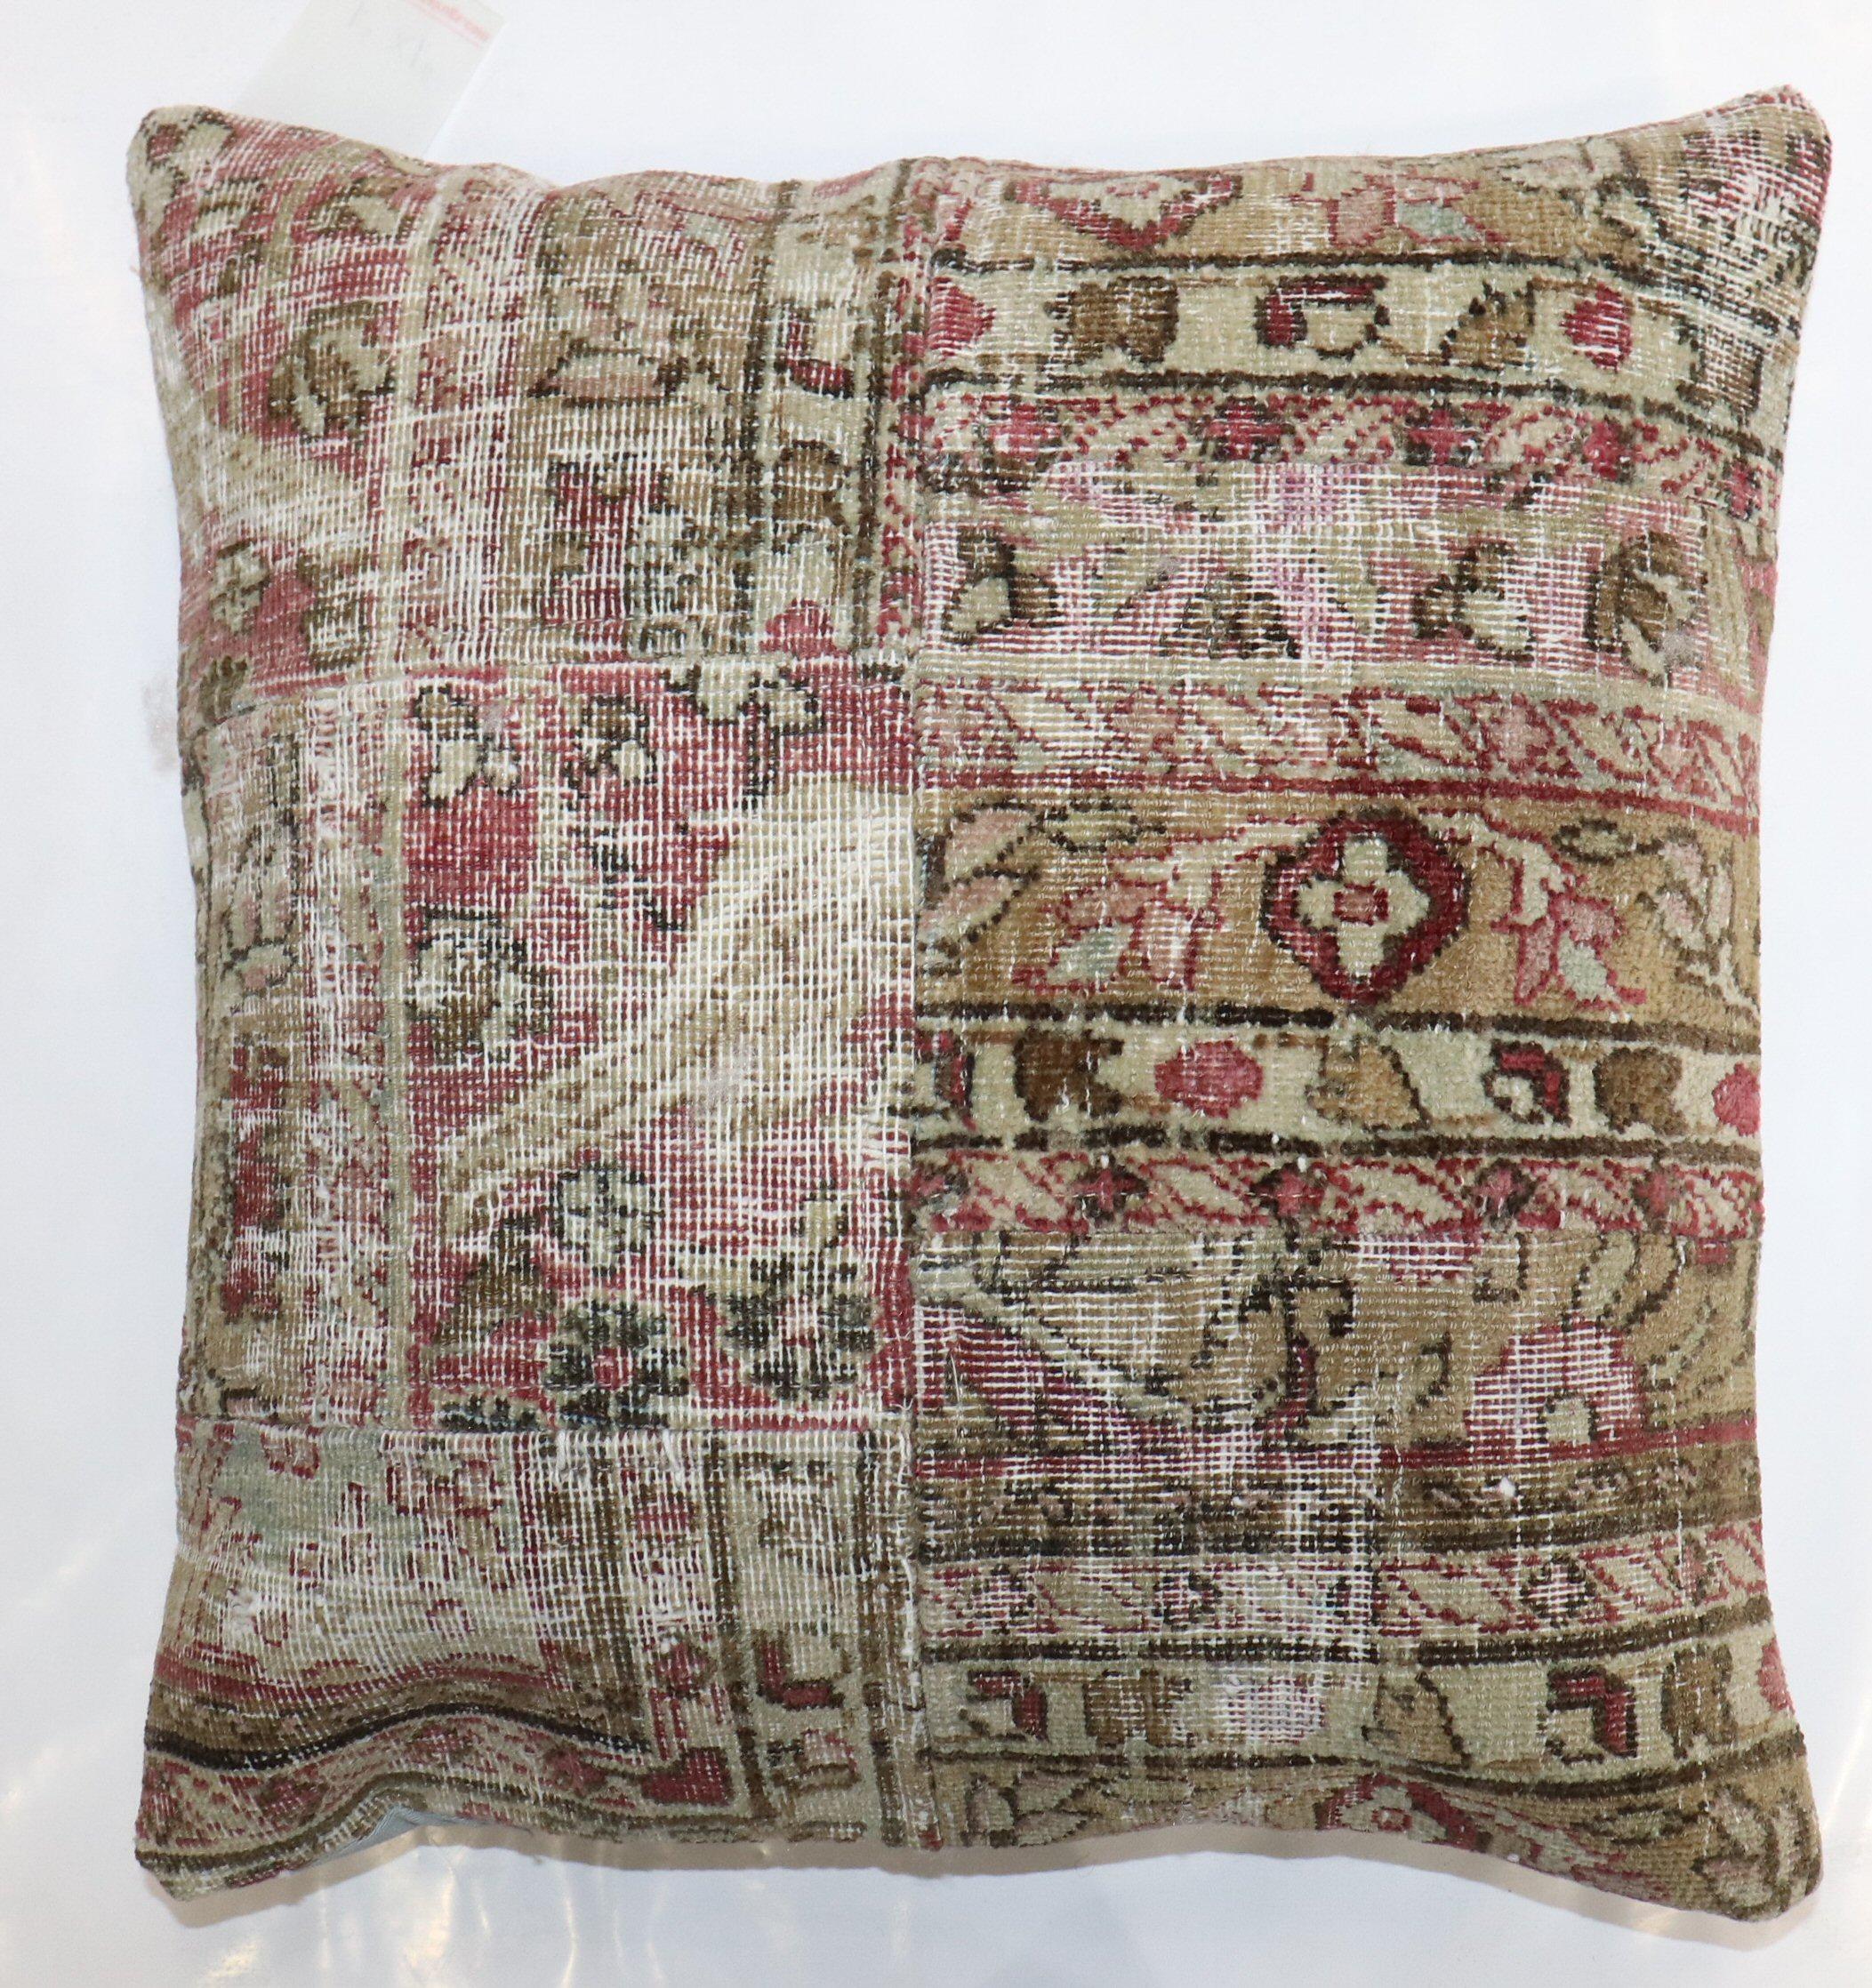 Pillow made from a 19th-century worn Persian Kerman rug made into a patchwork format. Fill insert and zipper closure provided

Measures: 18